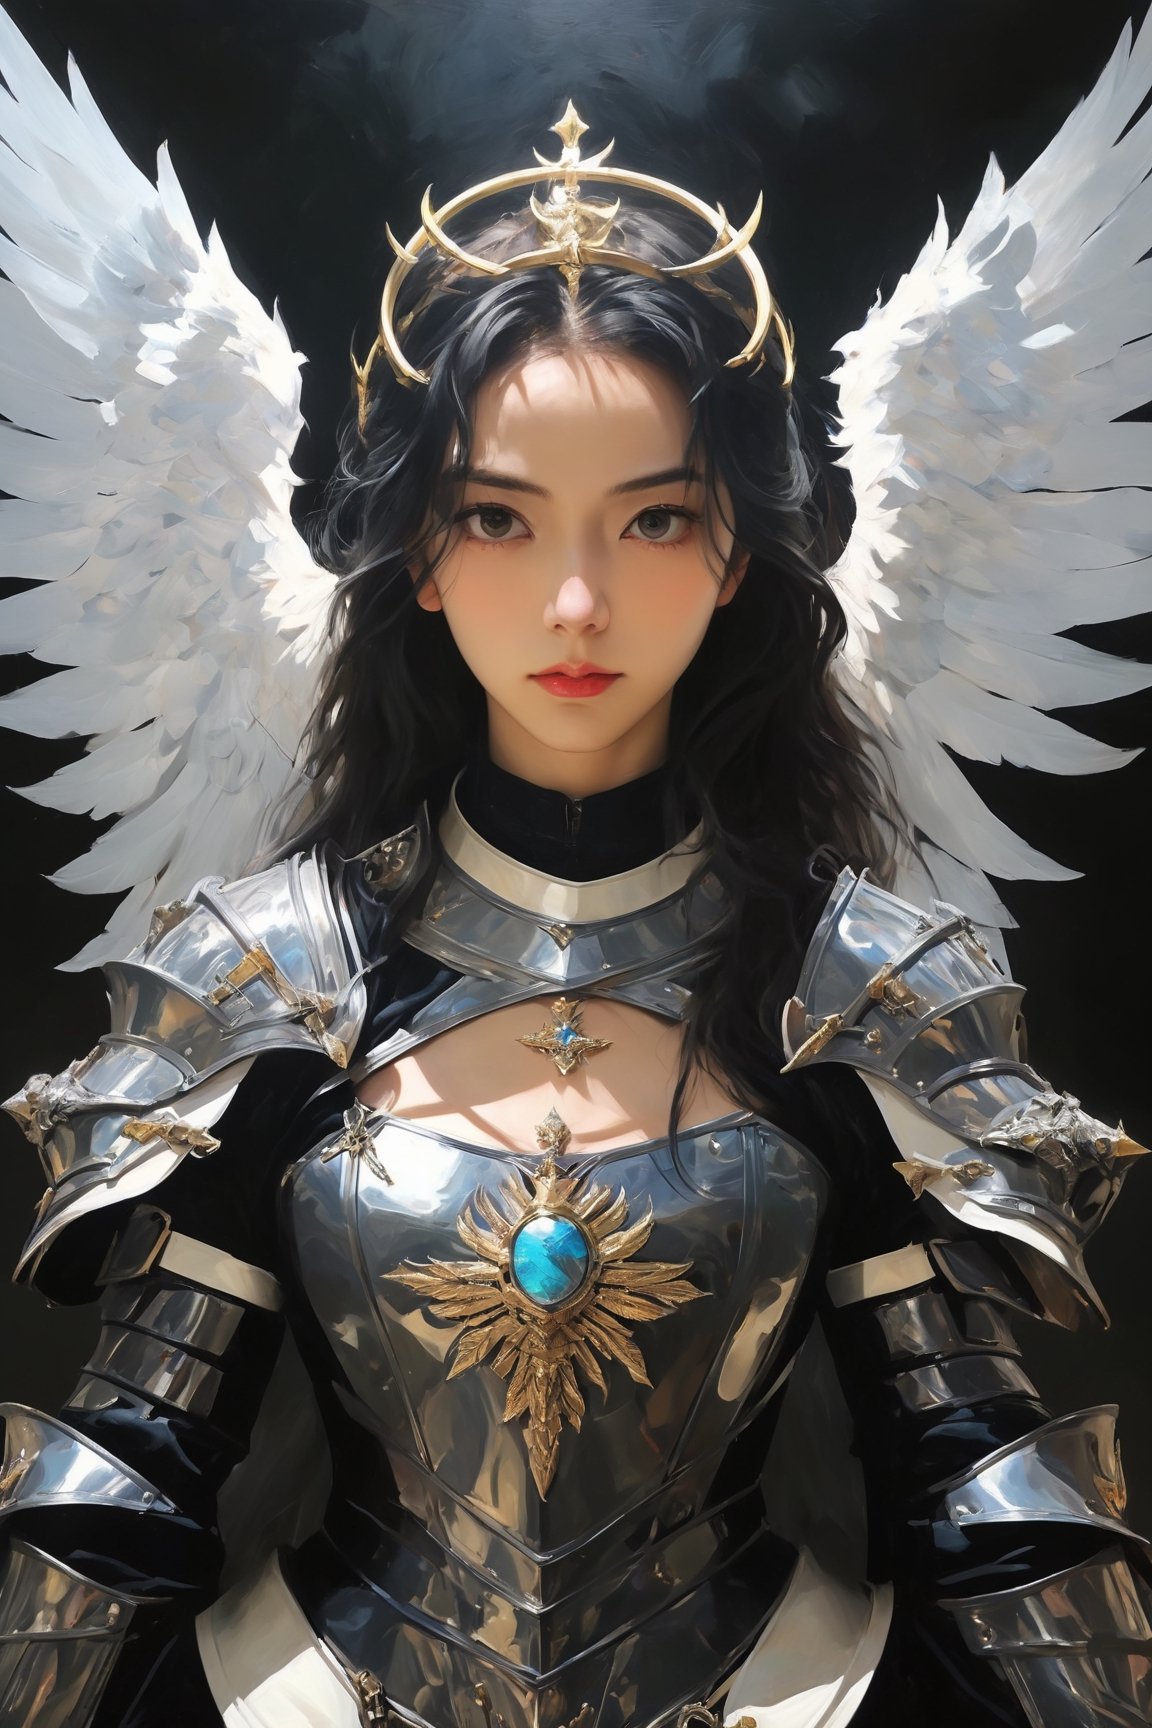 Realist portrait of Queen, beautiful face, cool vibes, goddess of genesis, masterpiece, painting darkly comedic precisionist, goddesscore armor, queen of sword, latex uniform, epic, ((Large Angle Wings)), aw0k magnstyle, danknis, sooyaaa, Anime , IMGFIX, niji style,sooyaaa